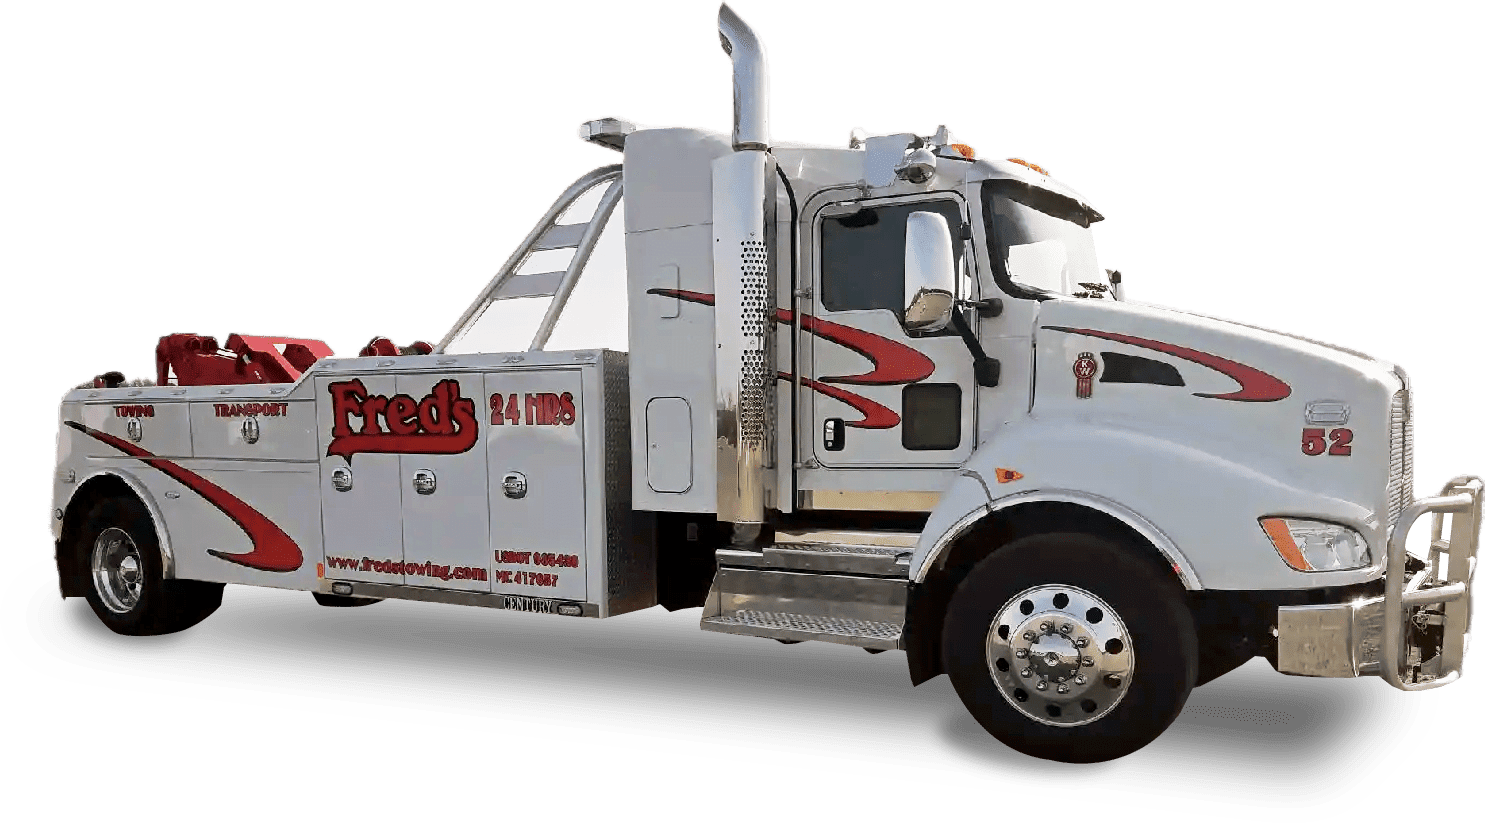 Freds Towing Transport Heavy Duty Towing Shadowed